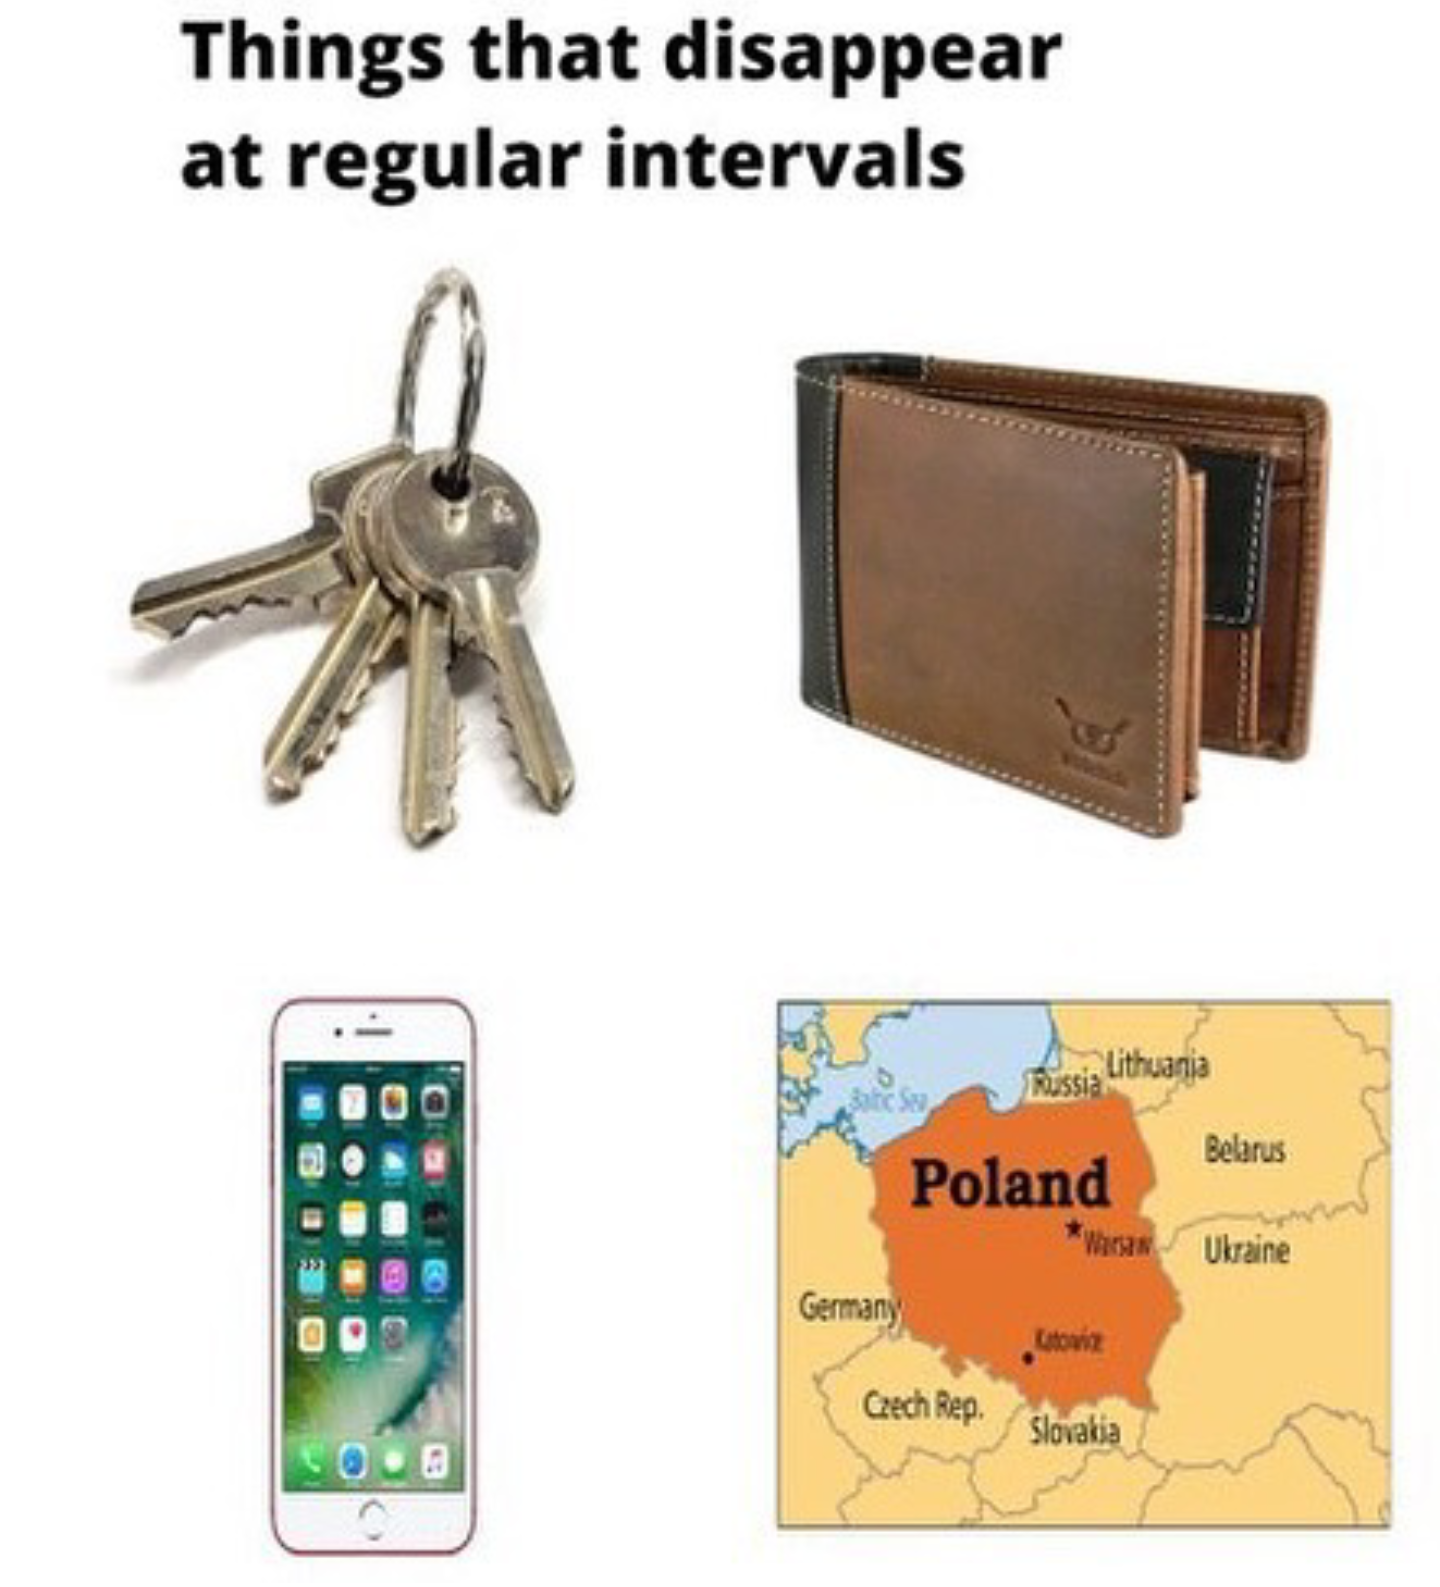 A mostly Polish related WWII meme